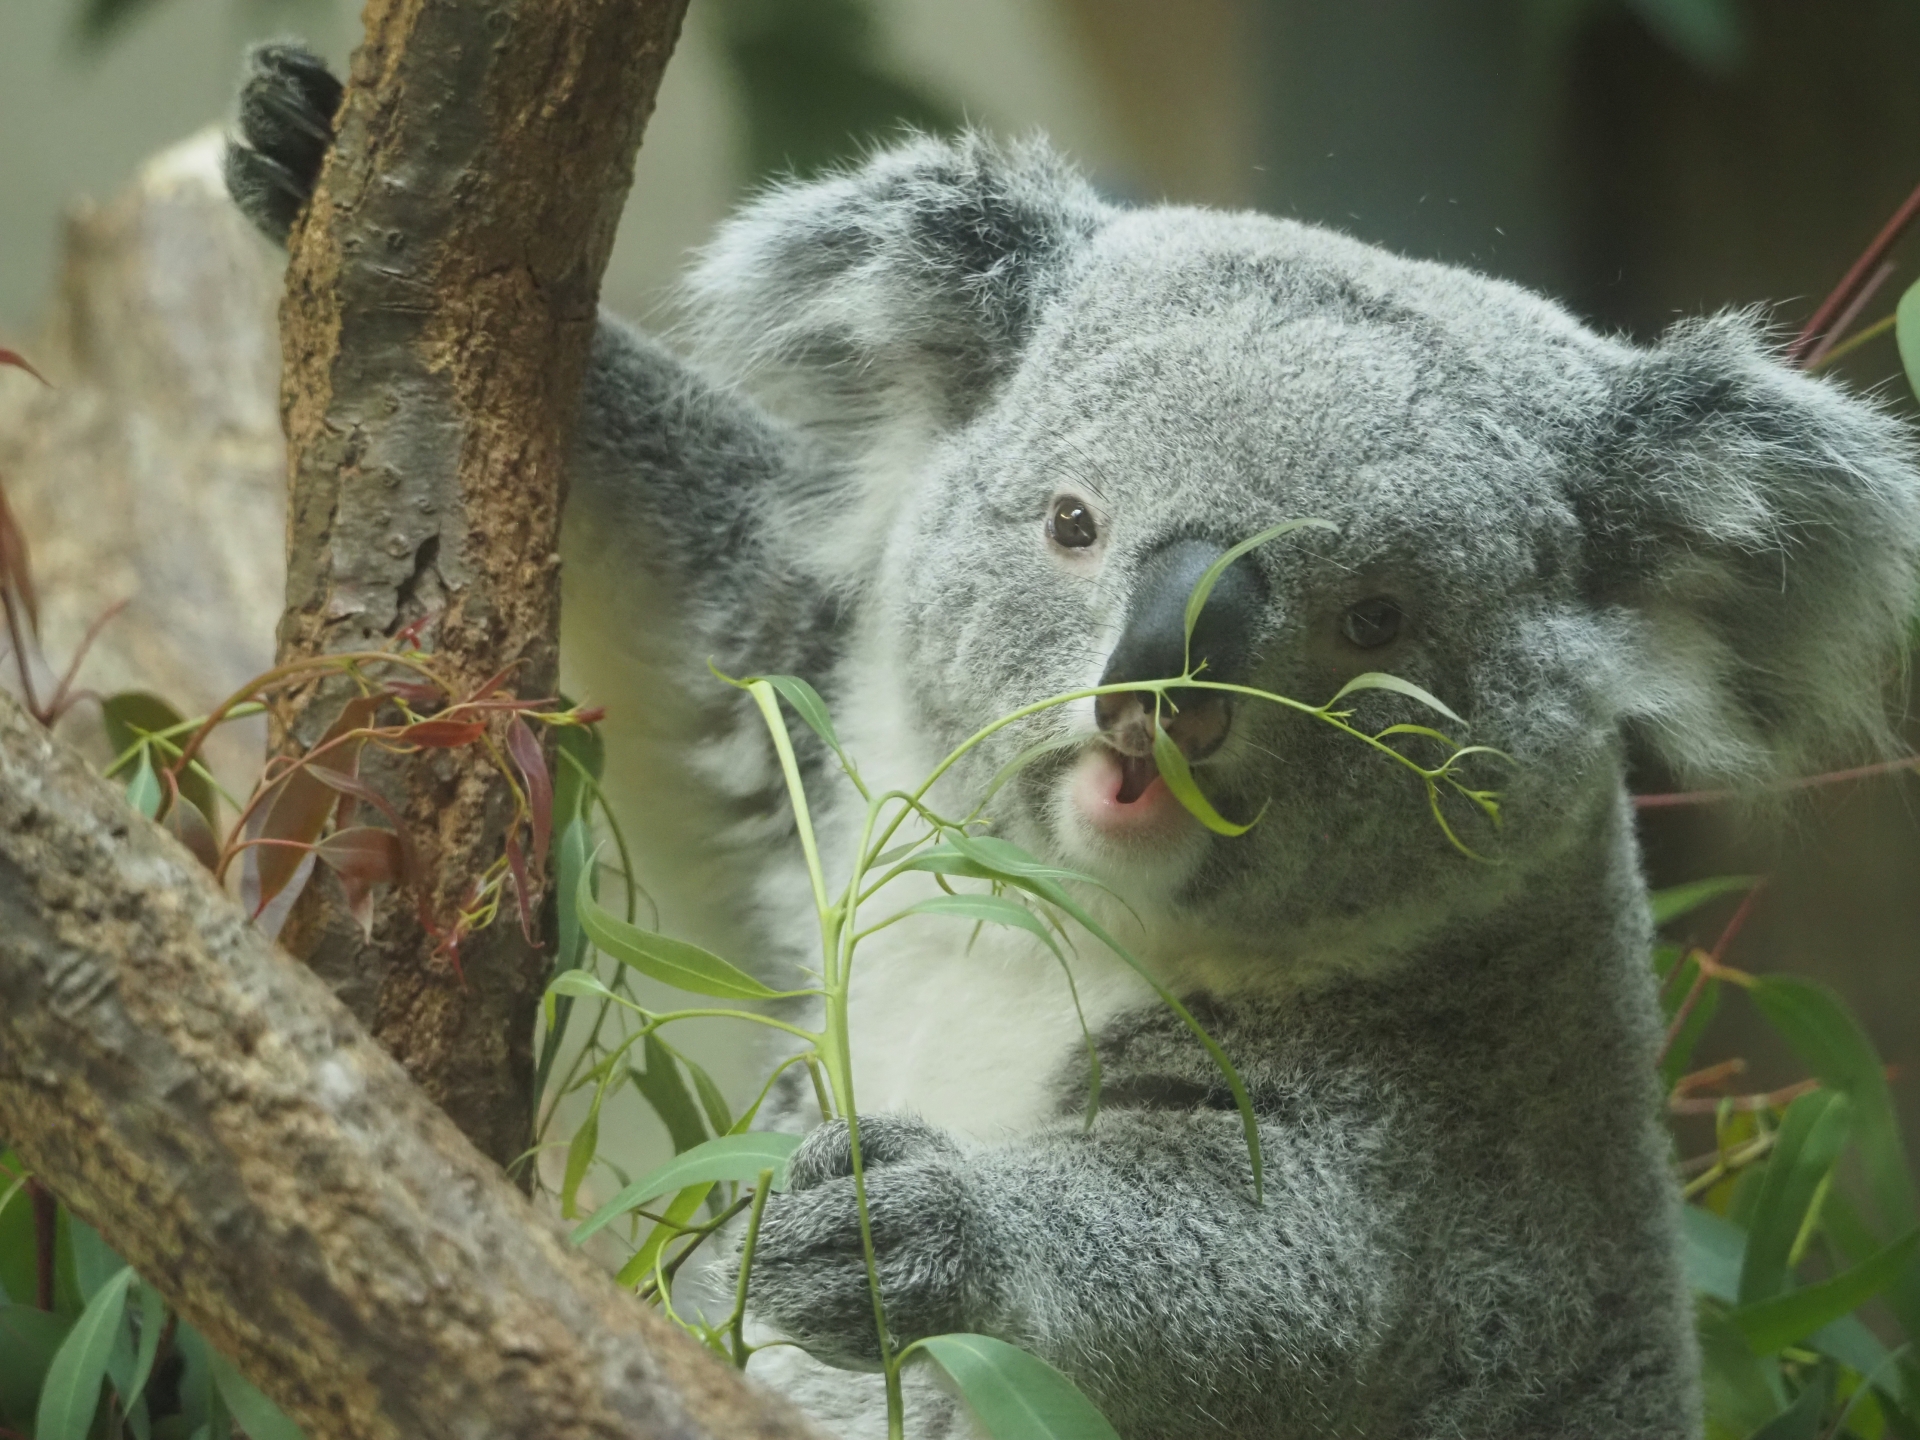 On a tree, there's a koala with eucalyptus leaves in its hand.